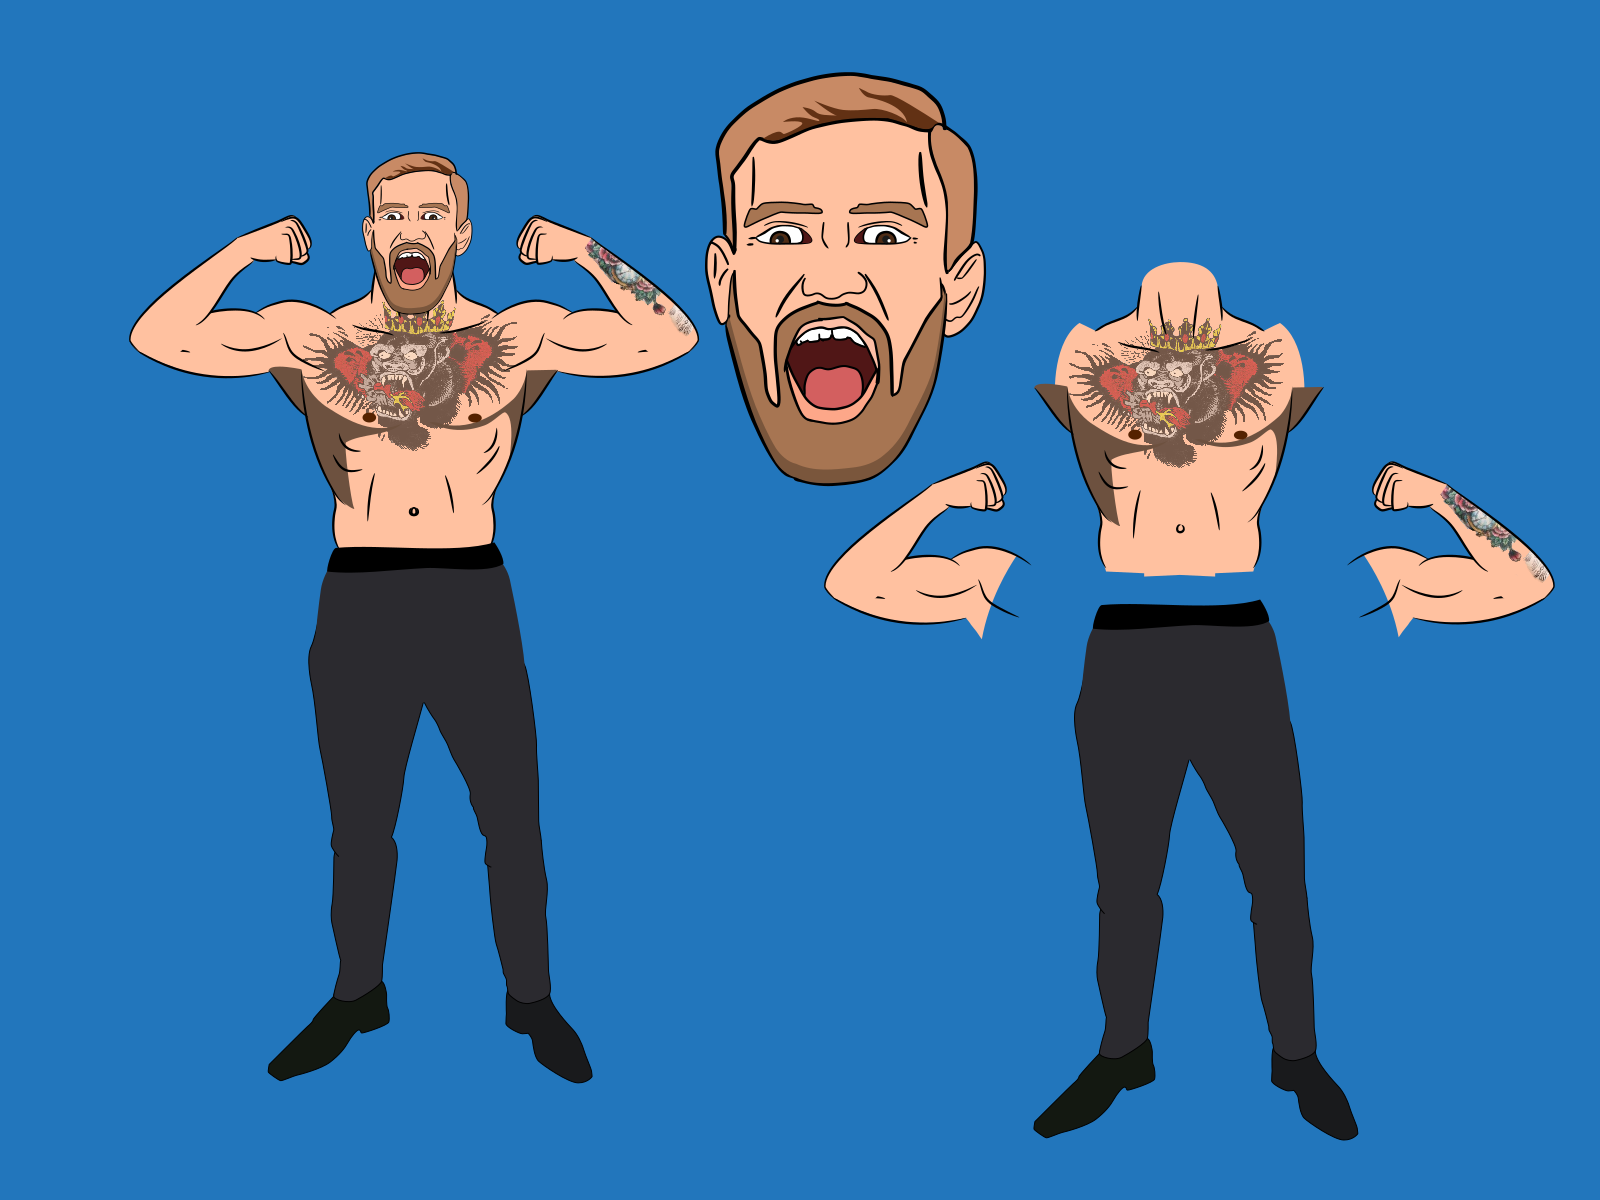 Dribbble - ConorMcGregor_Charater-Breakdown-buff.png by Jonathan Doré